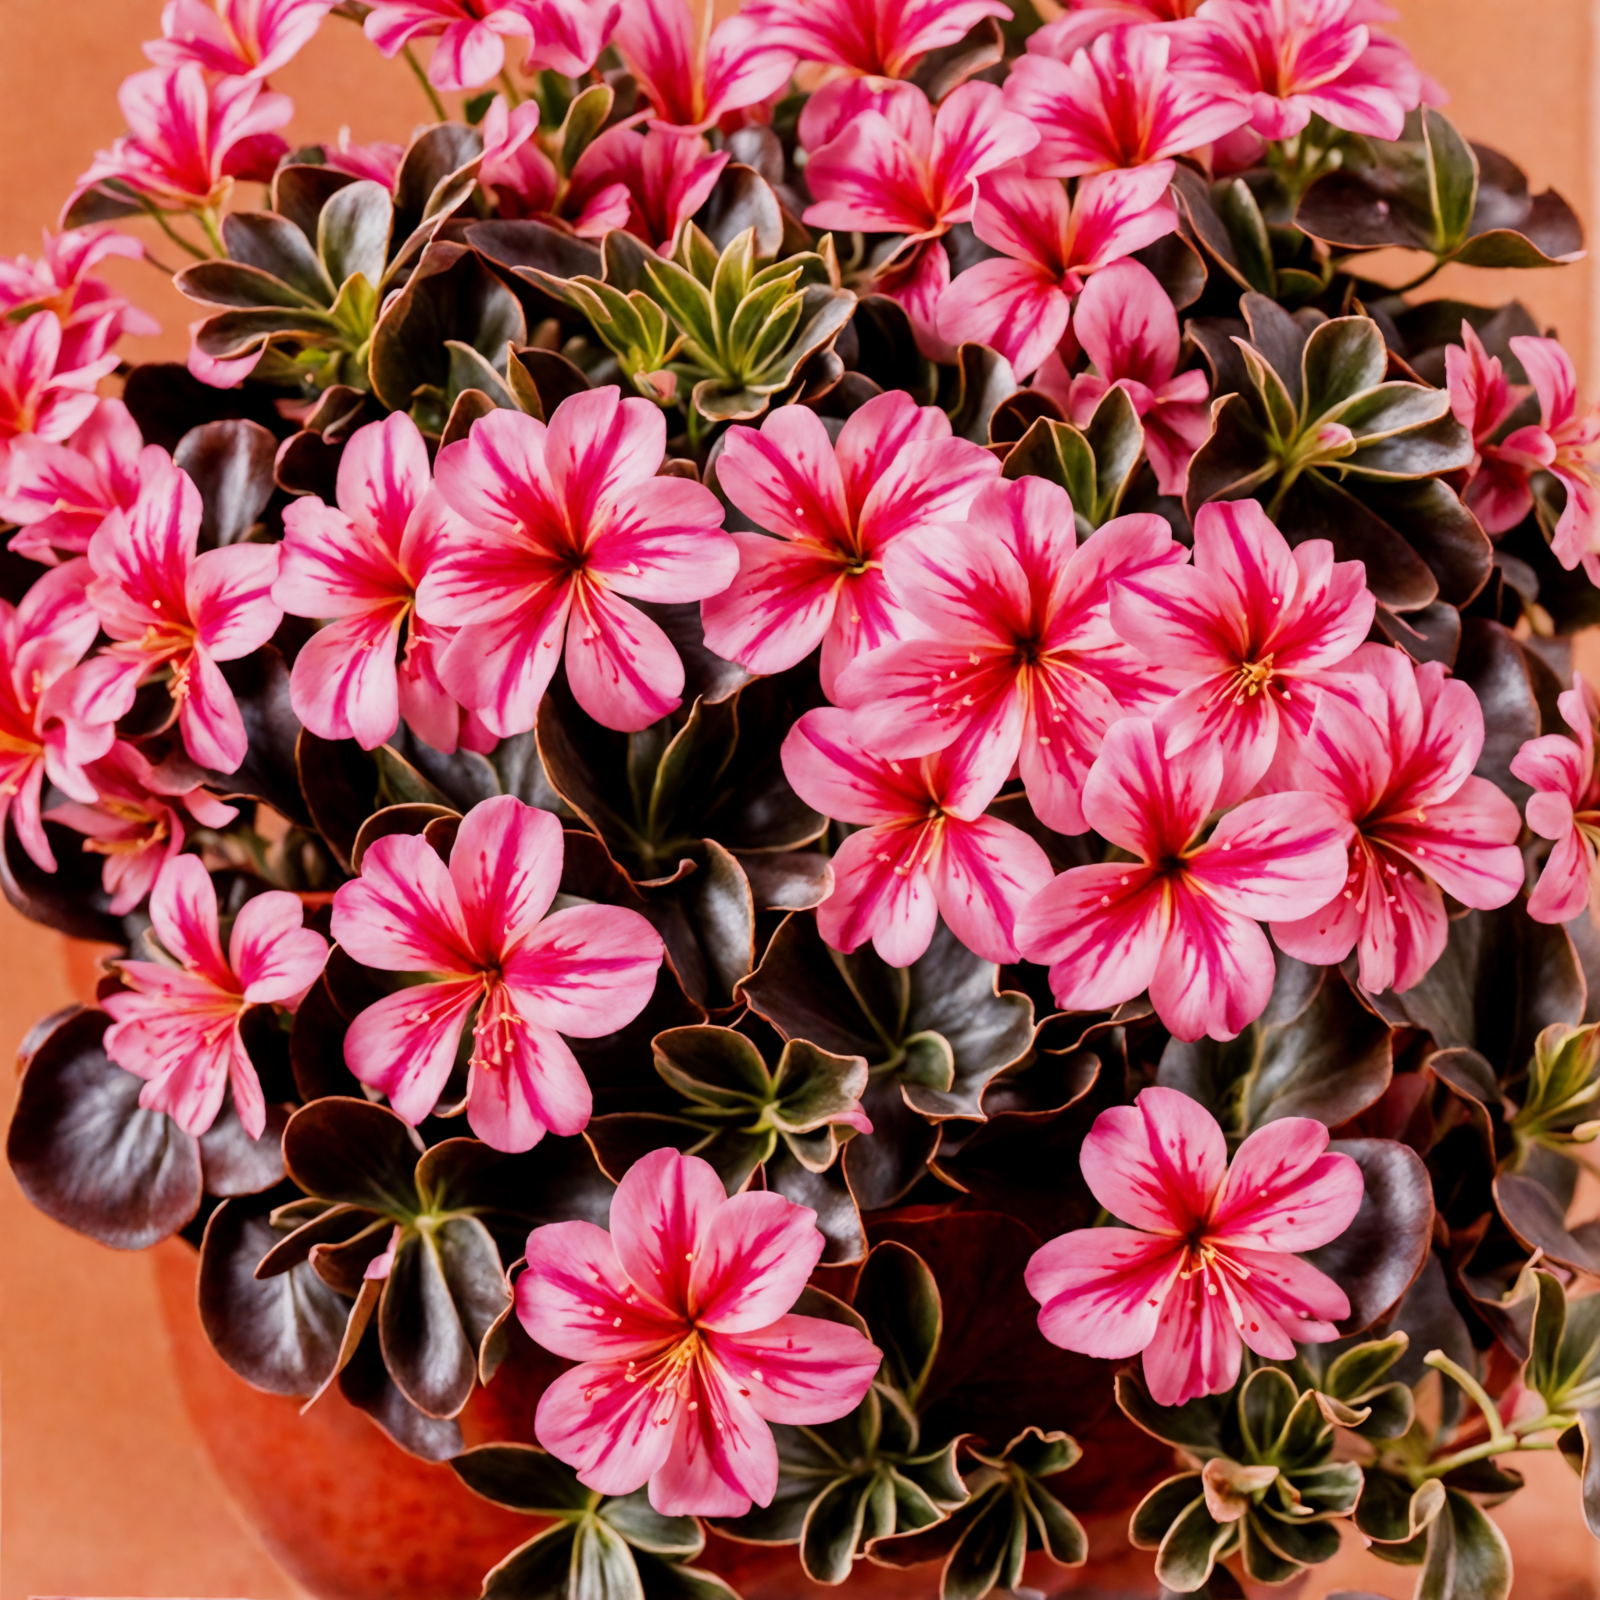 Cluster of vibrant pink Pelargonium peltatum flowers in a planter, with clear lighting and a dark background.